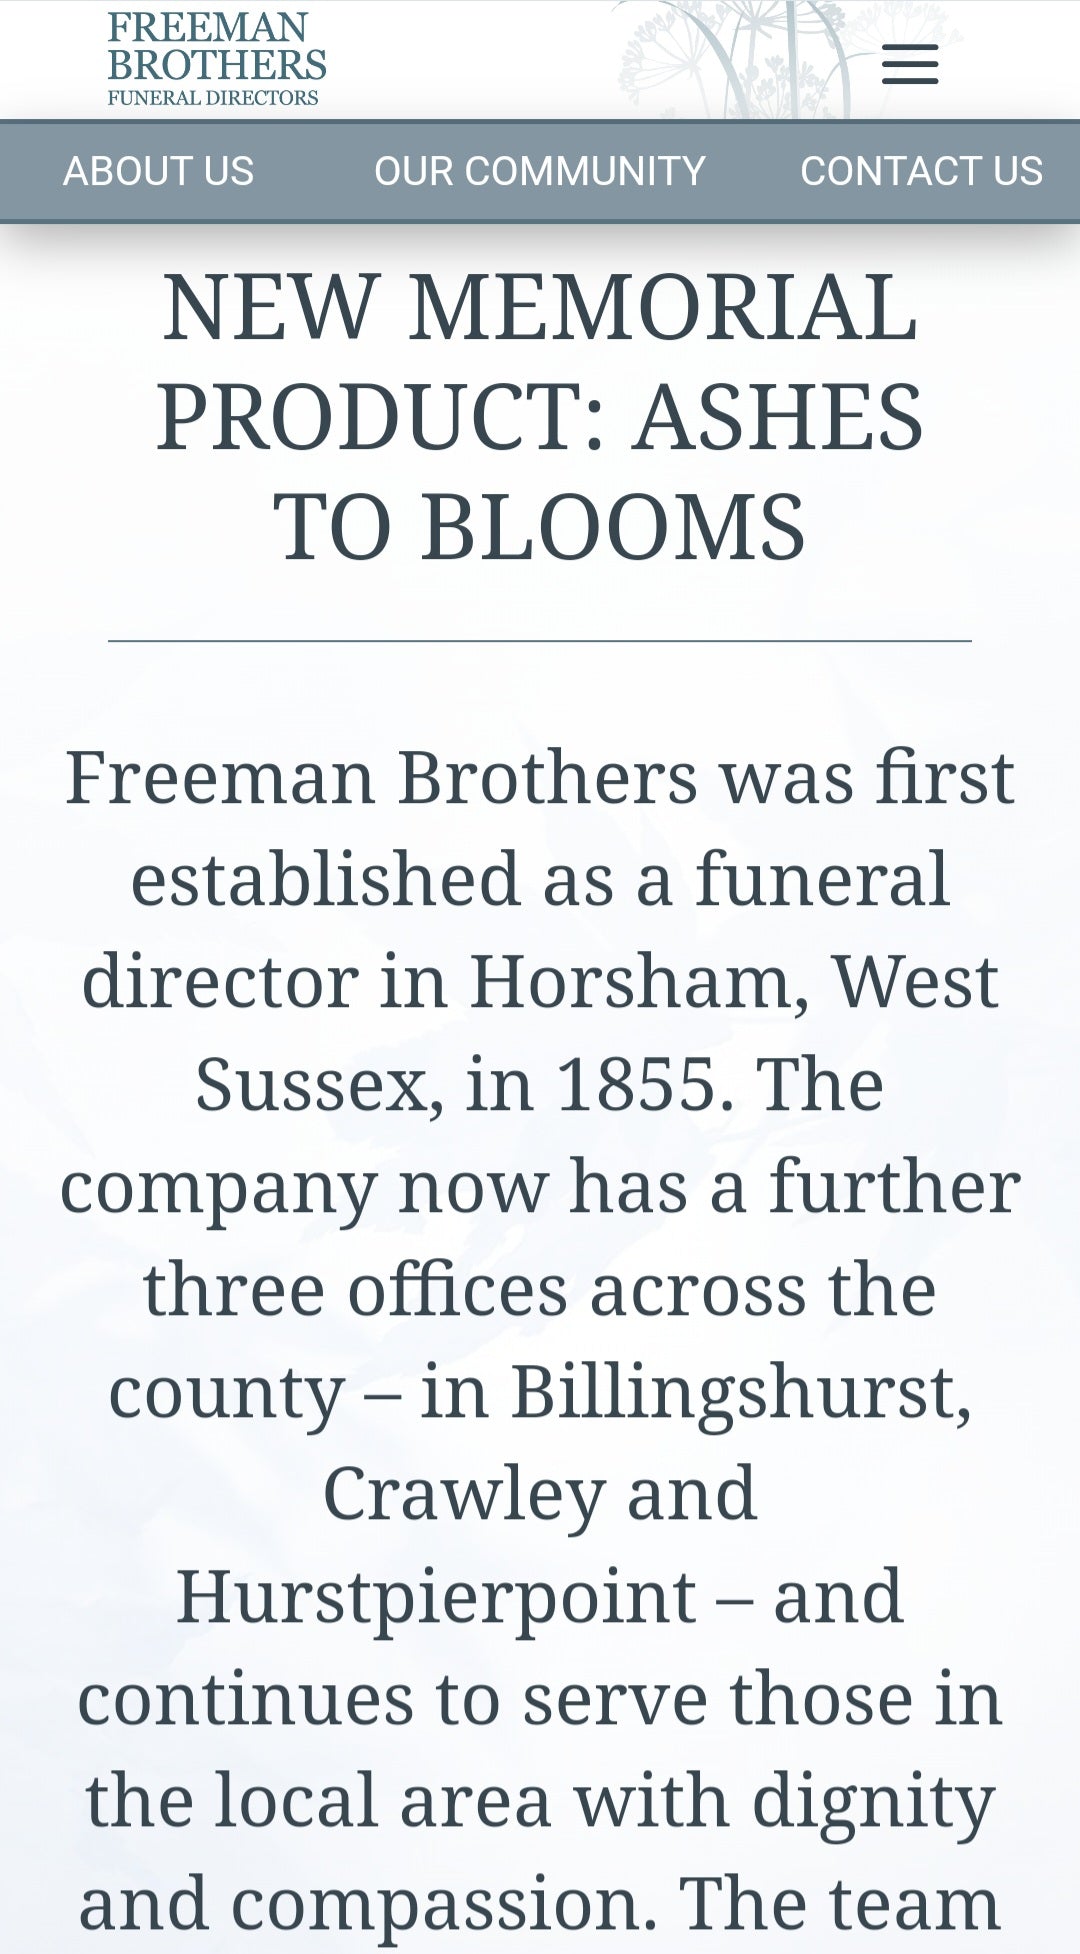 "NEW MEMORIAL PRODUCT: ASHES TO BLOOMS" - Freeman Brothers Funeral Directors' Blog, 16/08/23